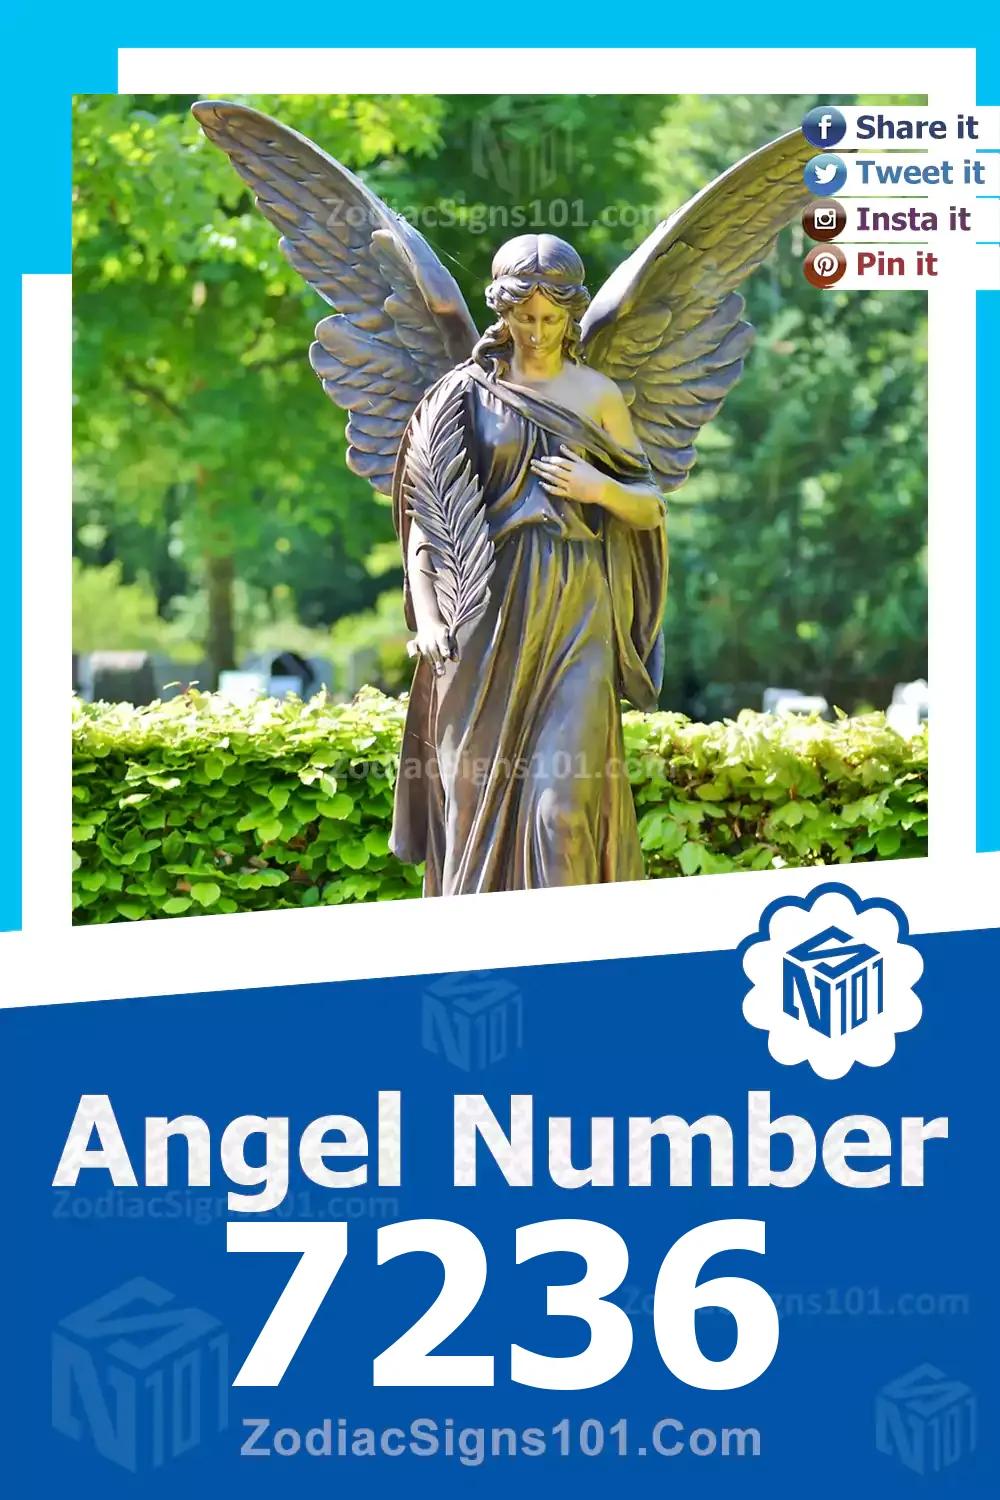 7236 Angel Number Meaning